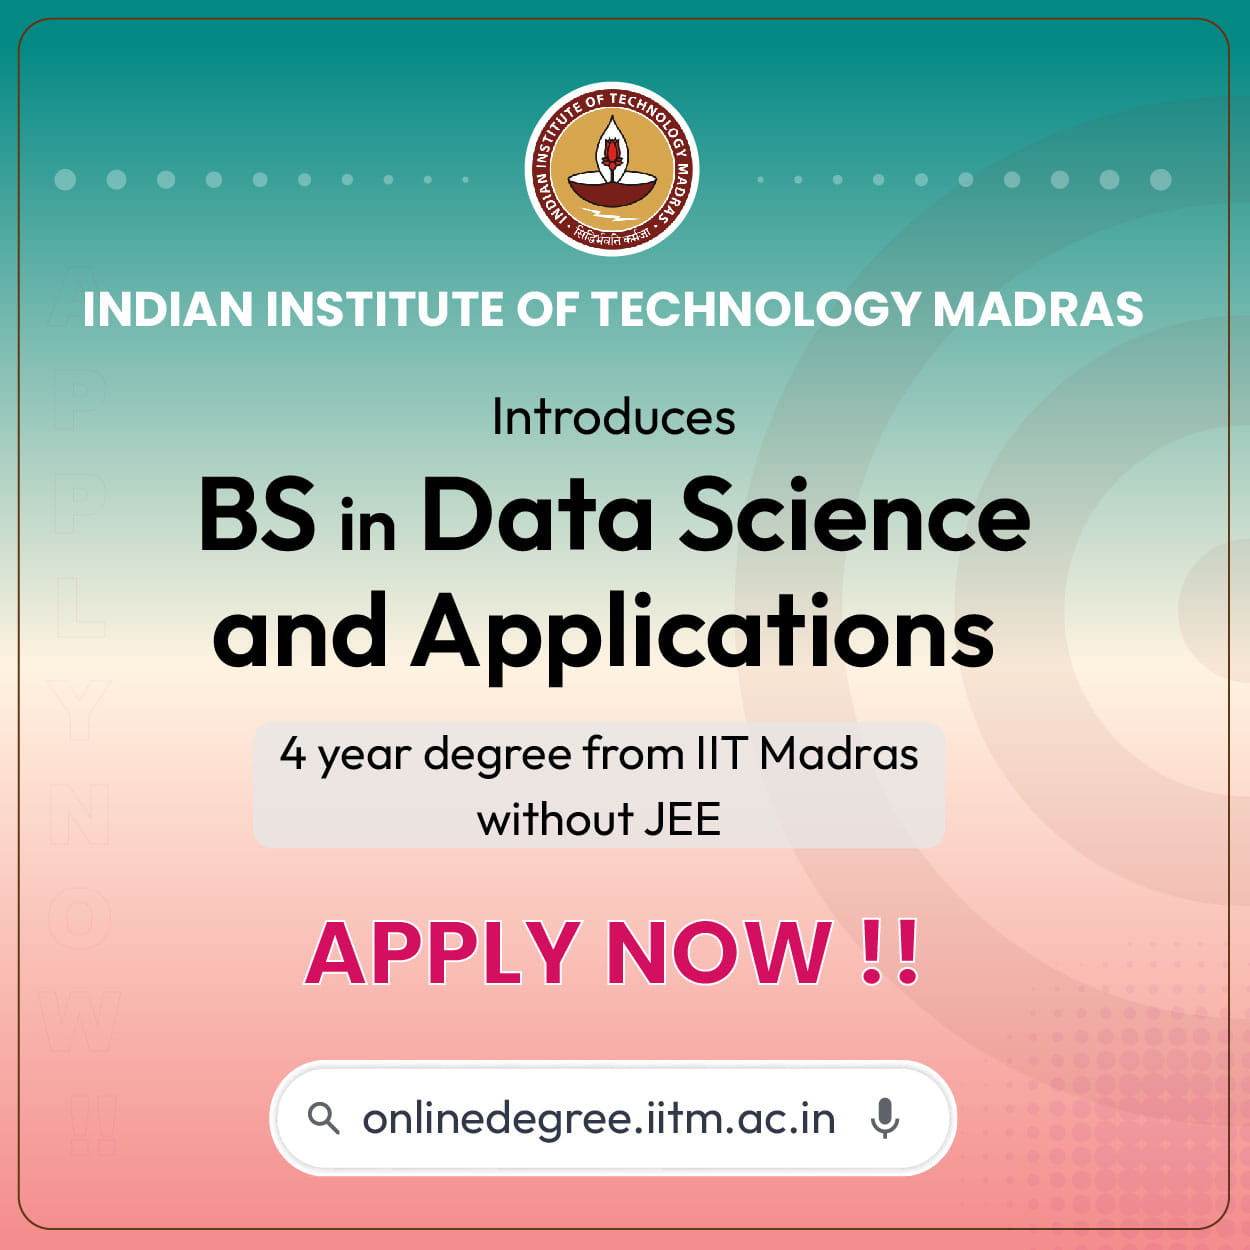 IIT Madras BSc in Programming & Data Science now comes with a 4-year BS Degree option, can appear for GATE and pursue an MTech